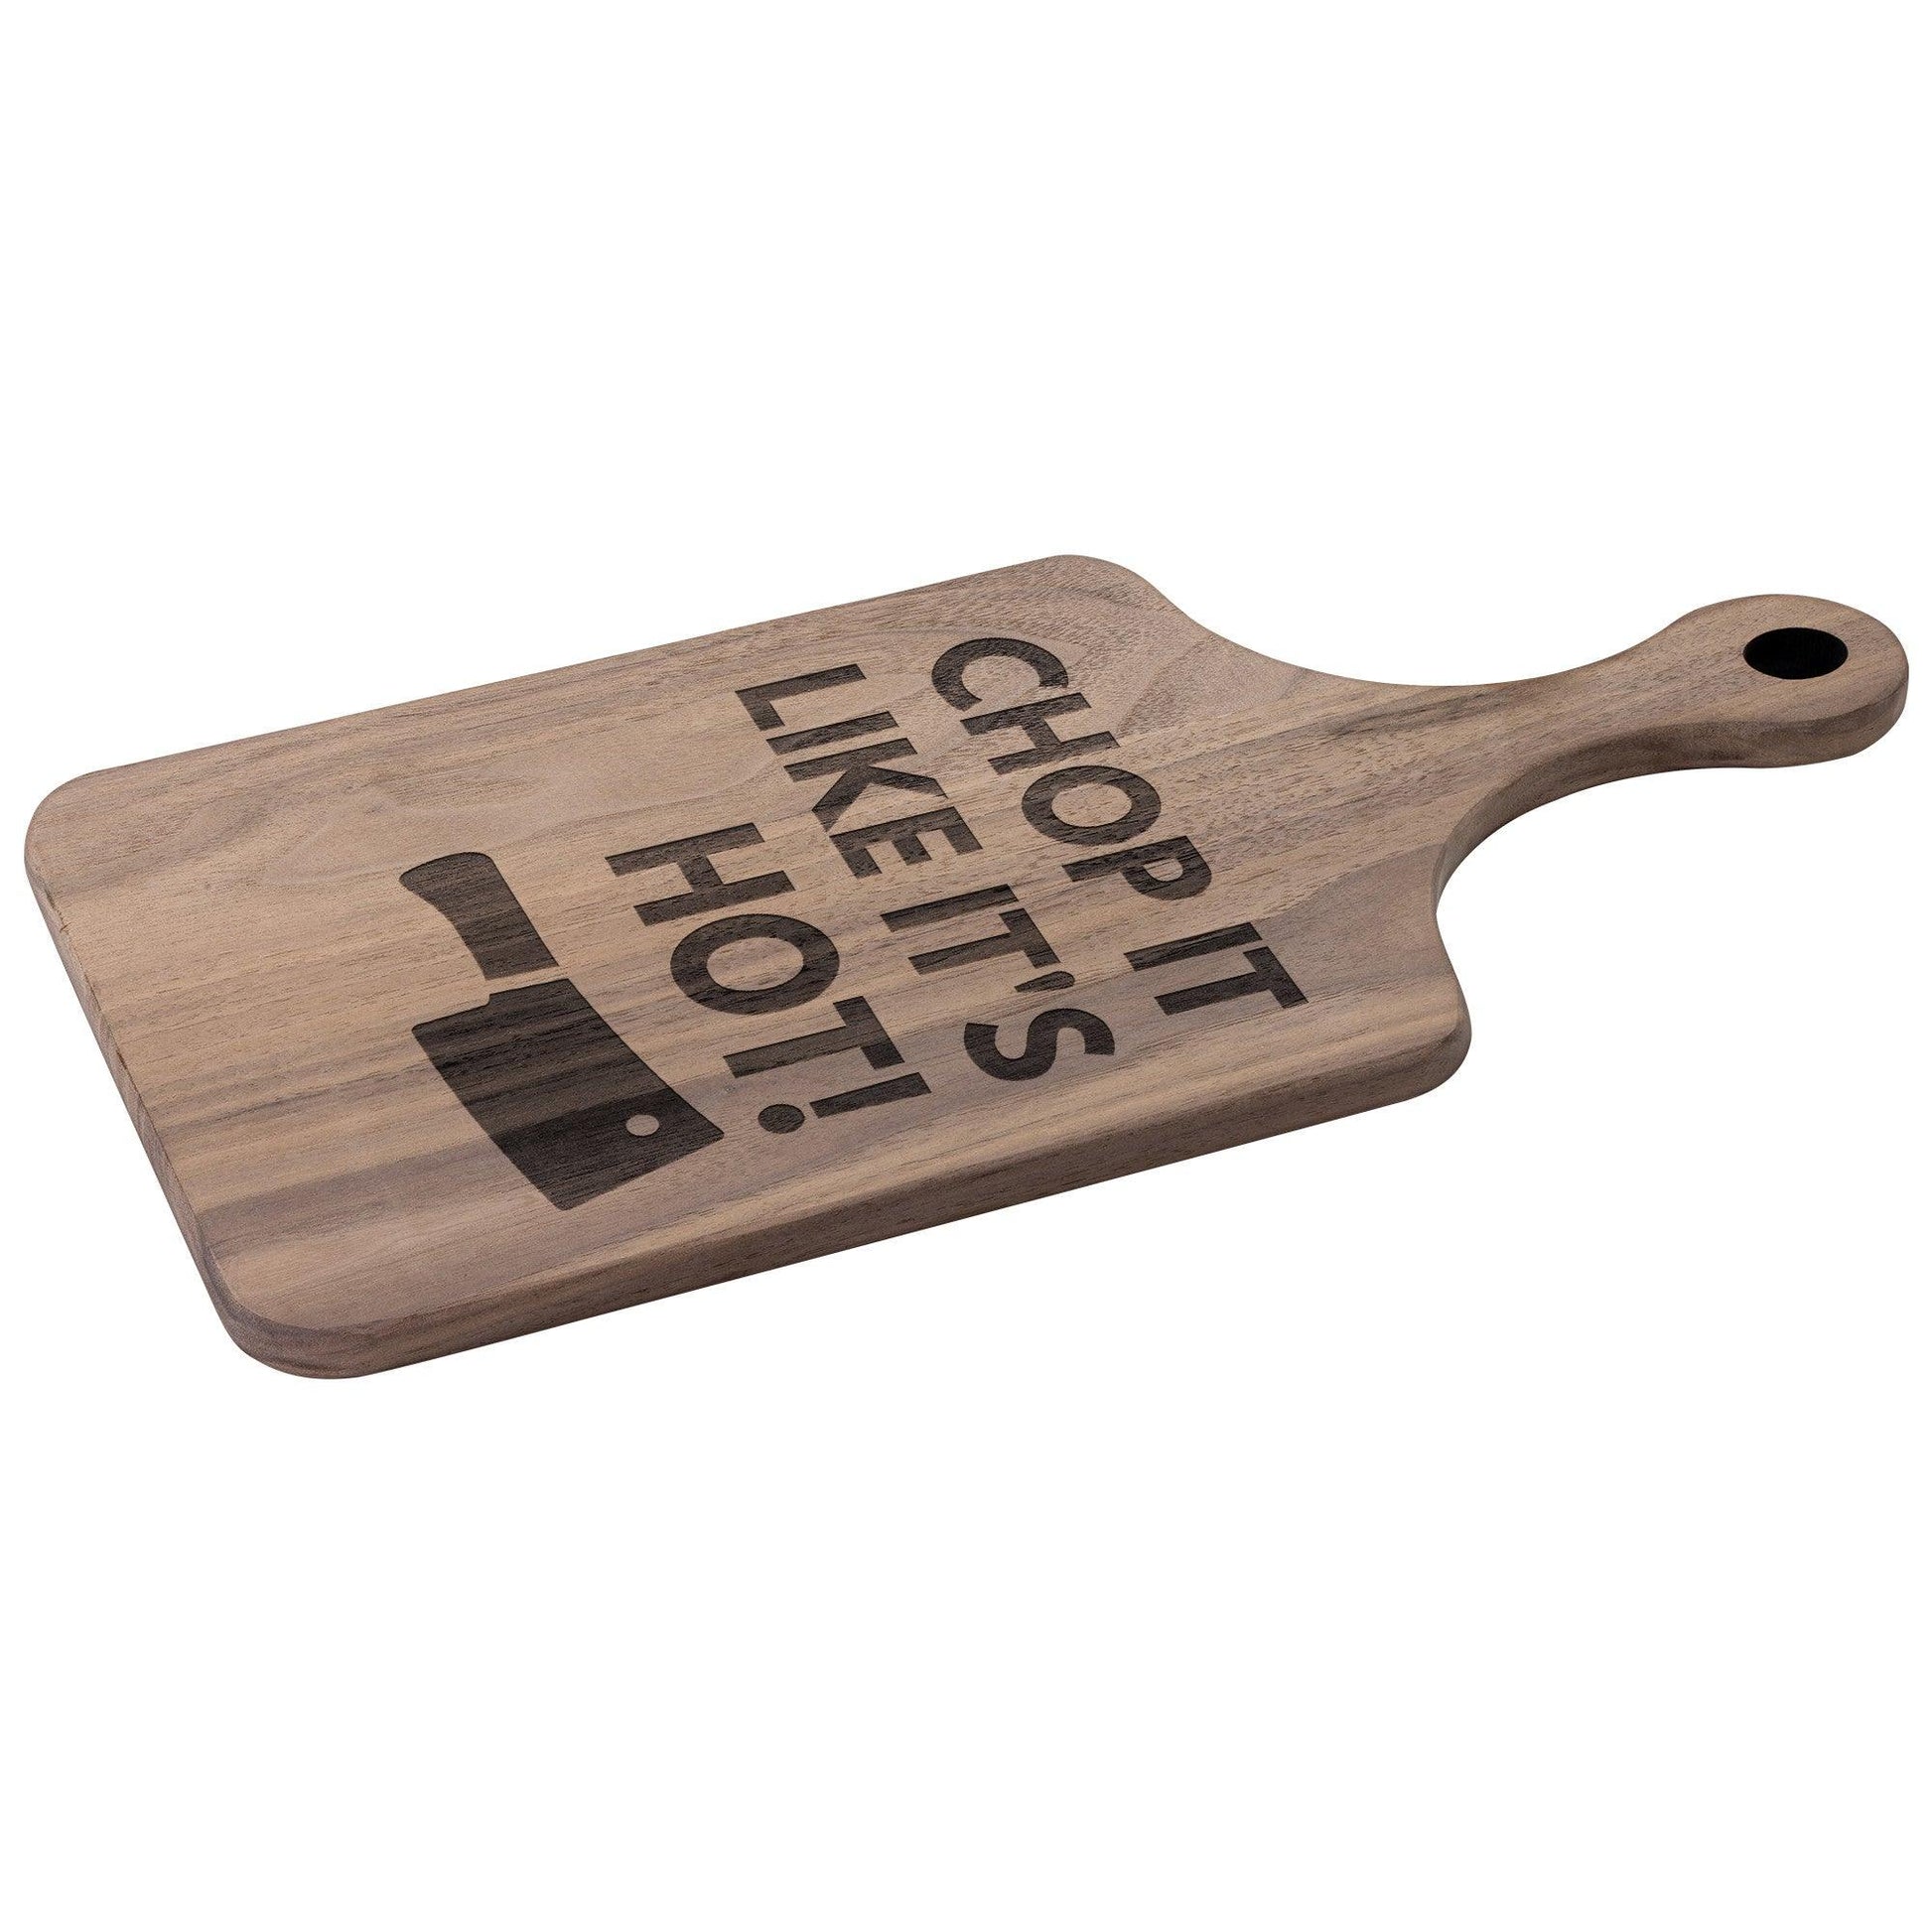 Chop it Like It's HOT! - Charming Family Gift